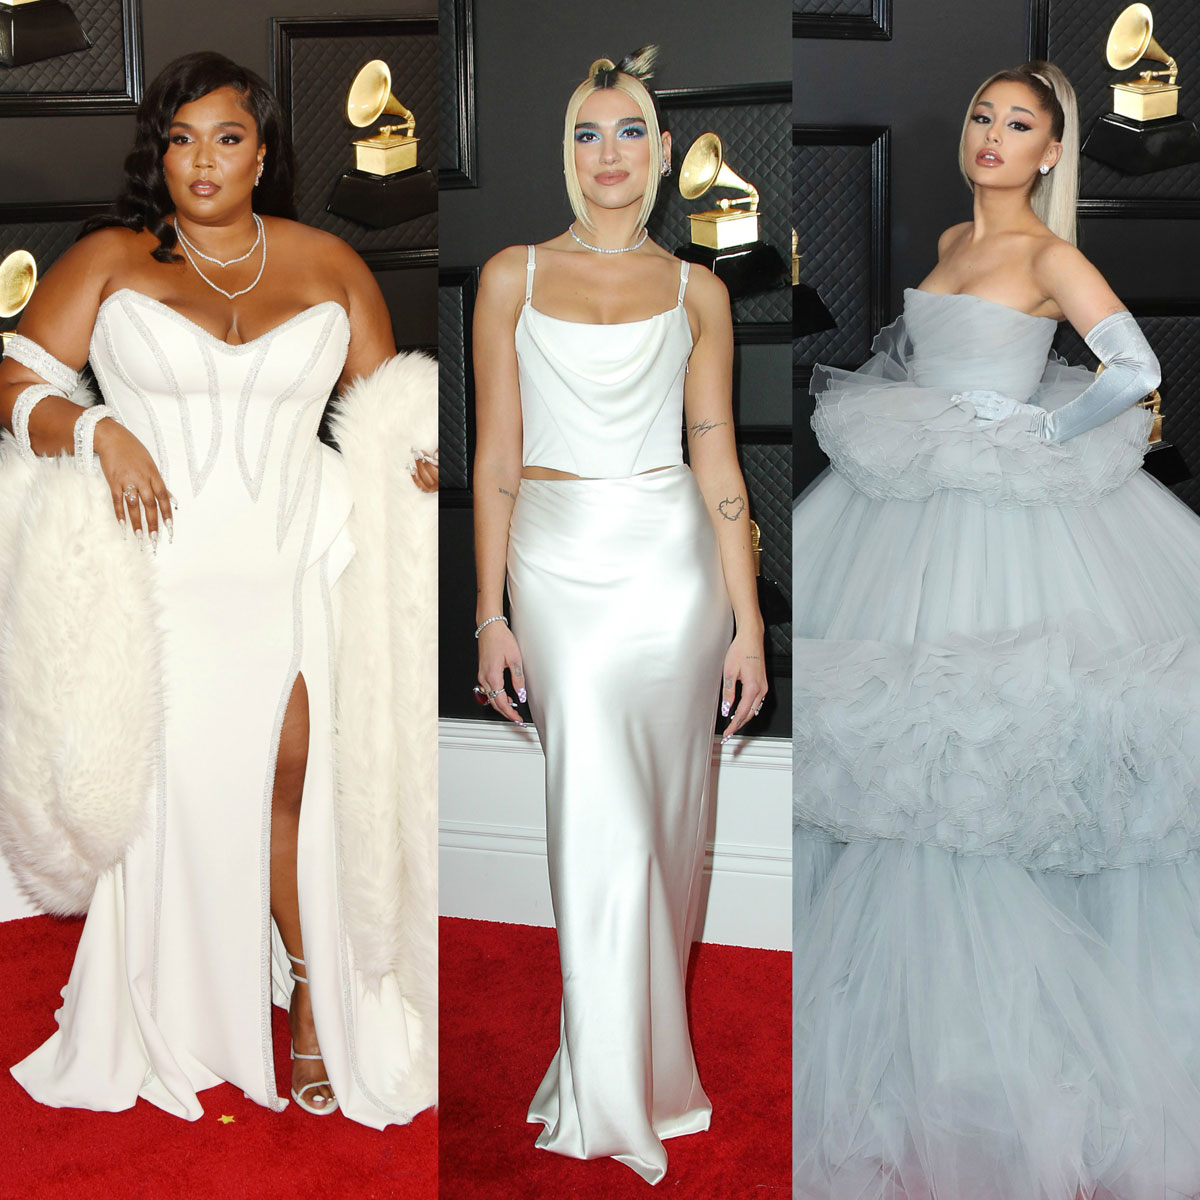 Grammys' best-dressed celebrities of 2020: Ariana, Lizzo and more